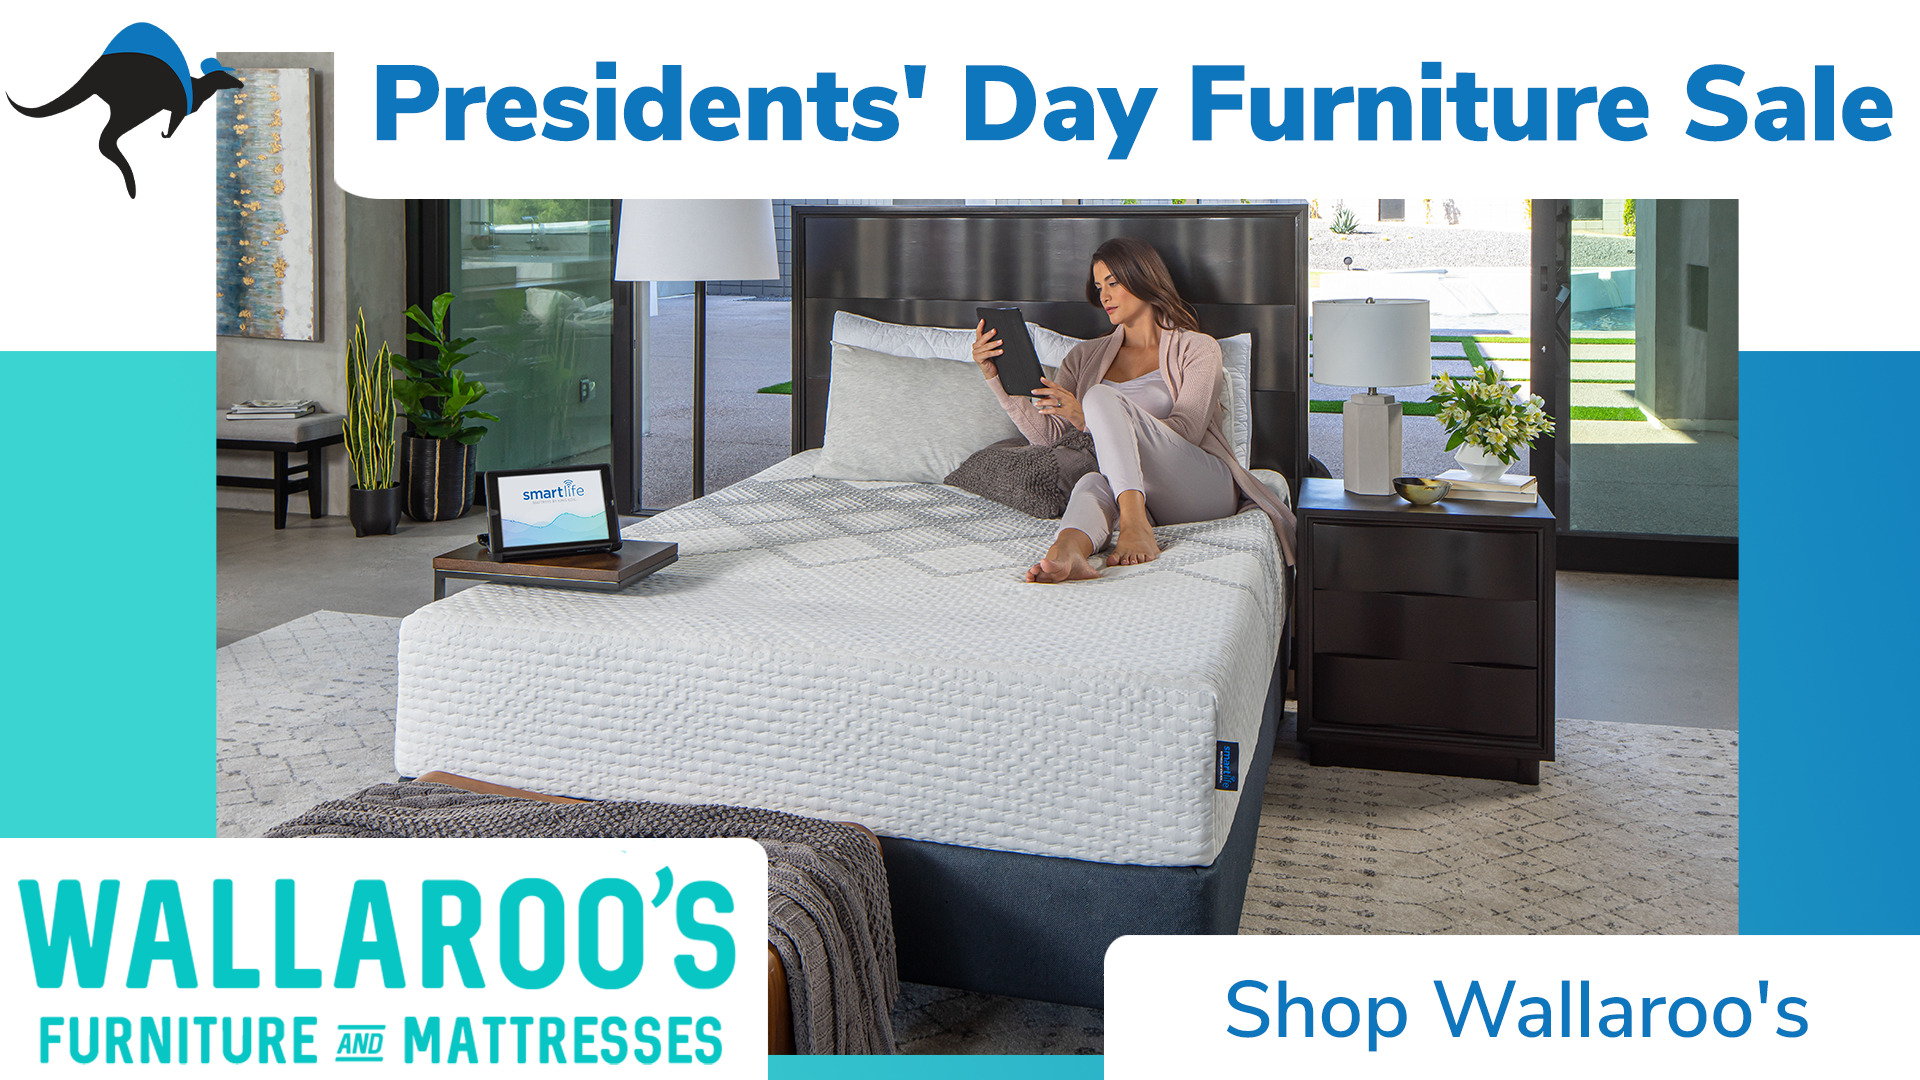 Presidents' Day Furniture Sale